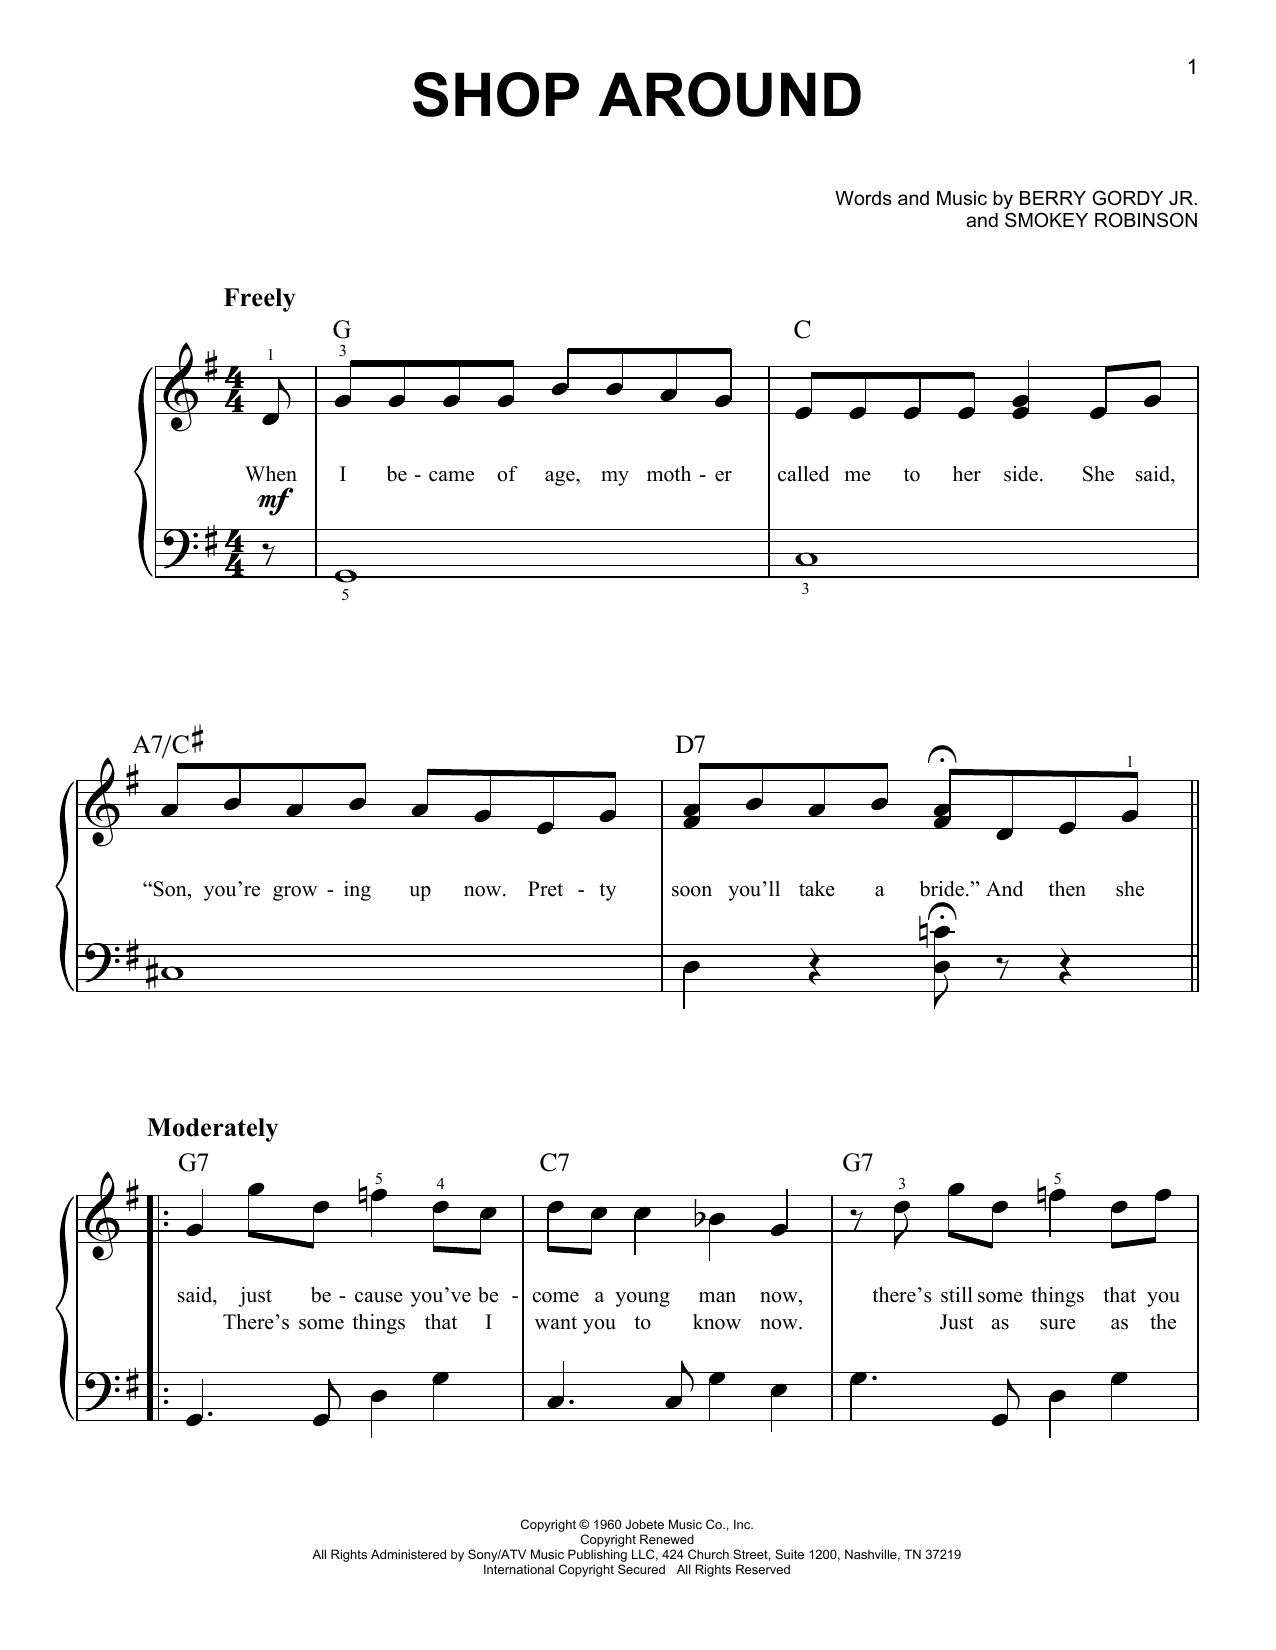 Download The Captain & Tennille Shop Around Sheet Music